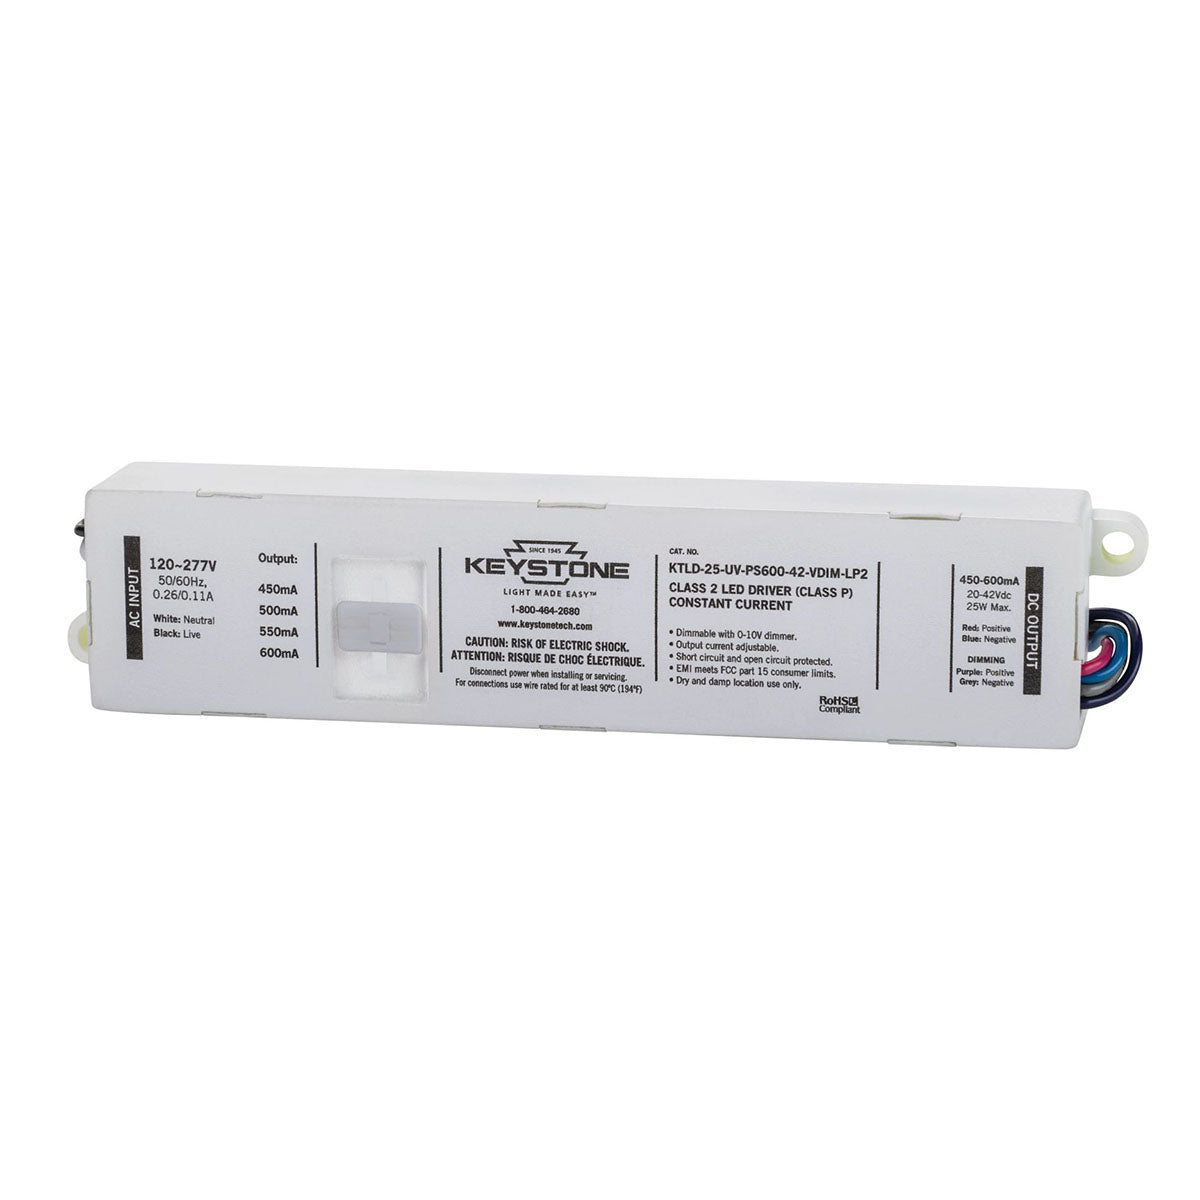 Power Select LED Driver, 25W, Adjustable Constant Current 450-600mA, 0-10V Dimming, 120-277V Input